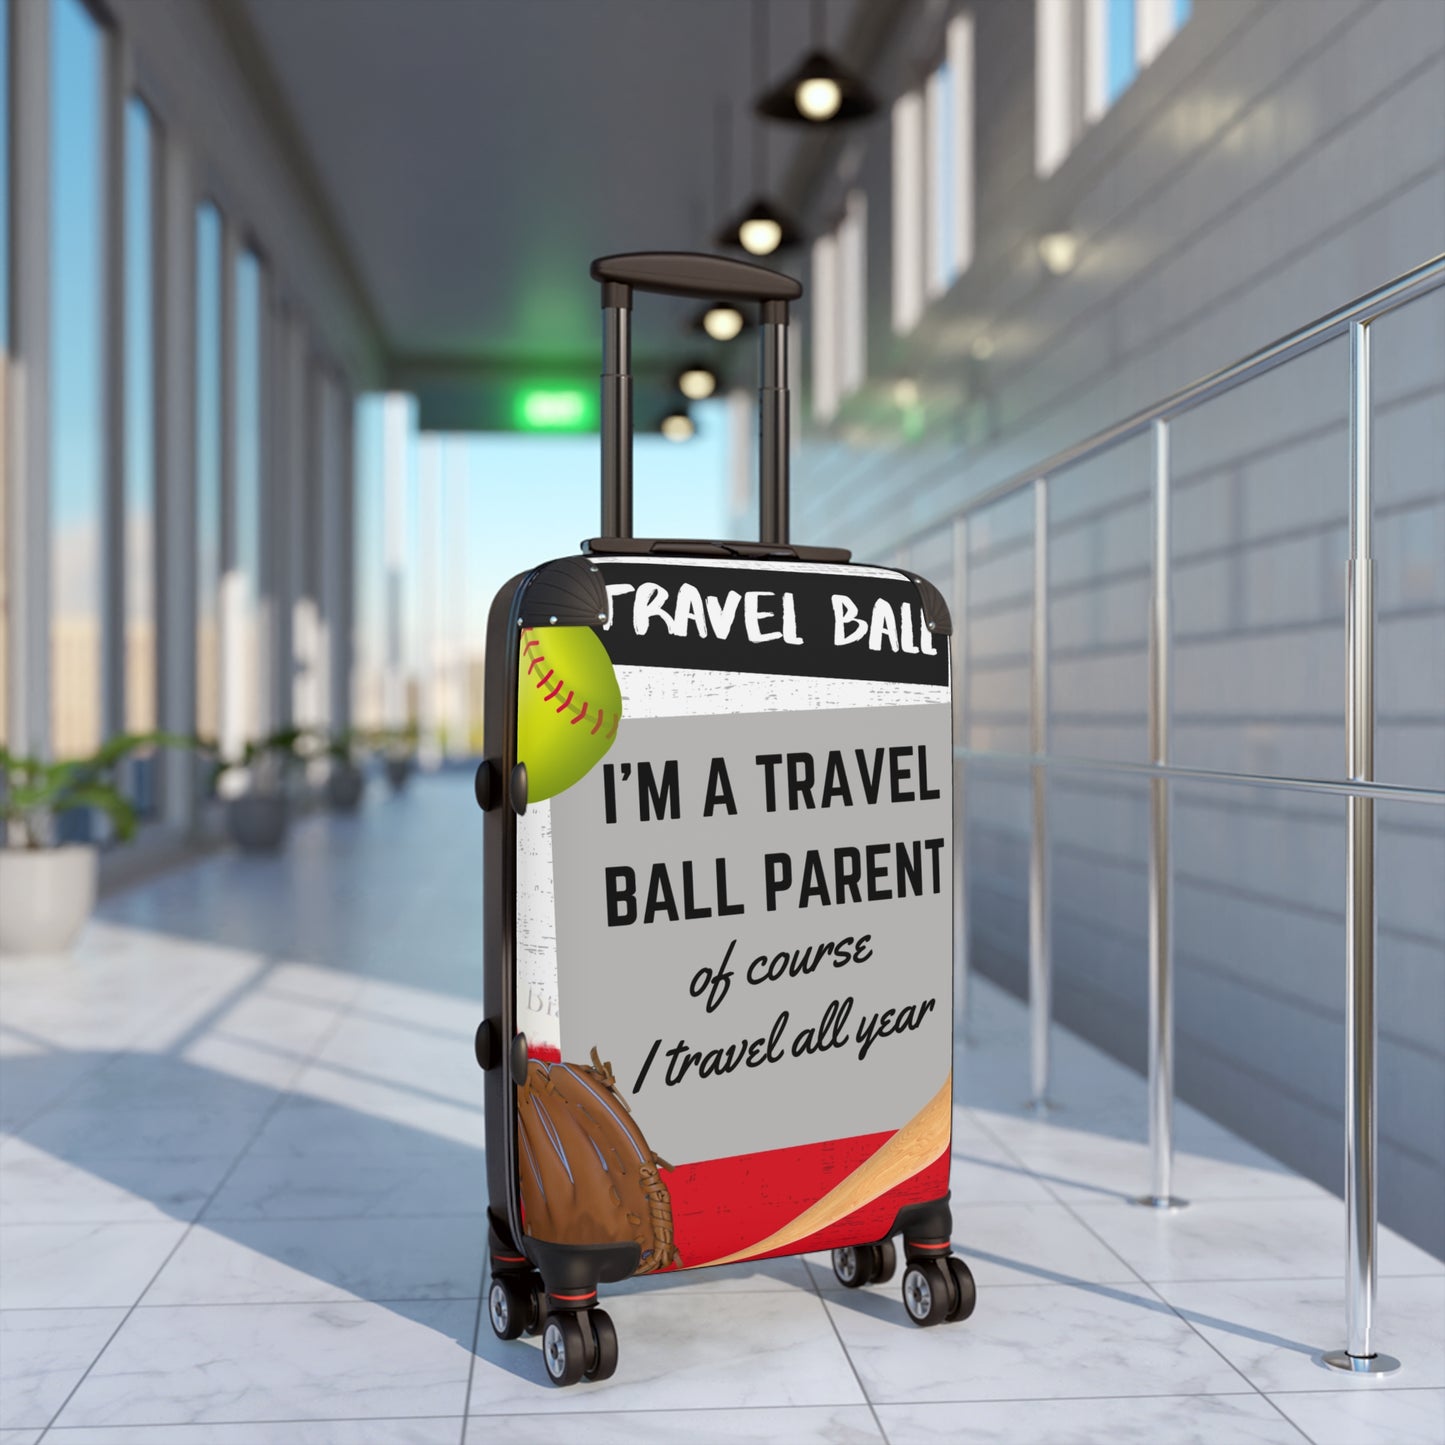 Travel Softball Parent Suitcase of course I travel all year Gift Birthday Holiday Playoff Tournament Ball